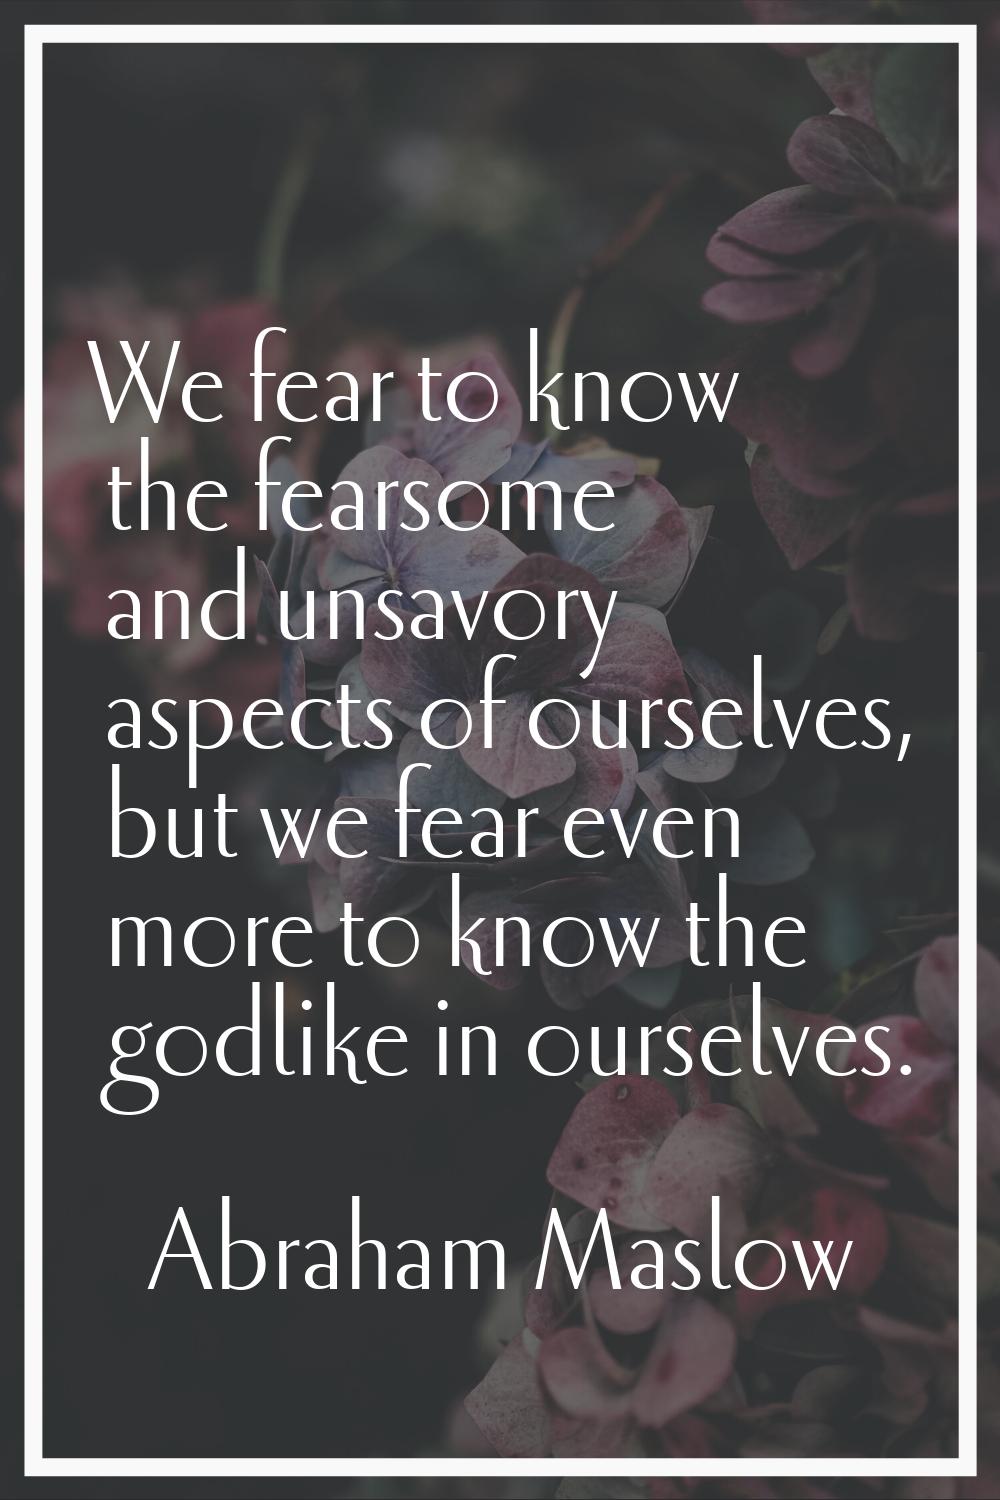 We fear to know the fearsome and unsavory aspects of ourselves, but we fear even more to know the g